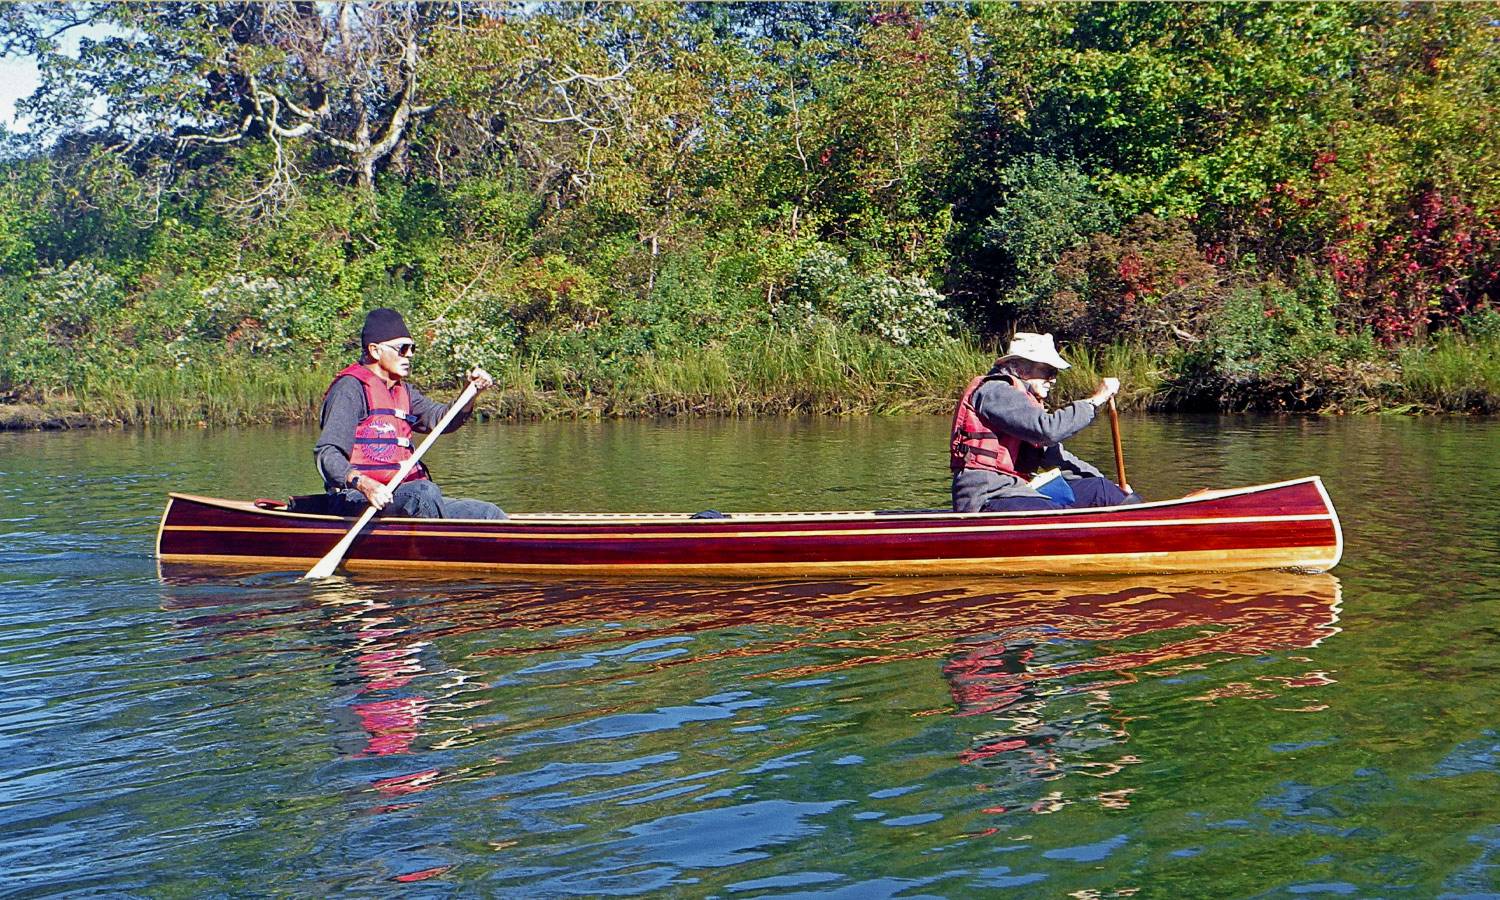 The comfortable tandem Mystic River canoe designed by Nick Schade